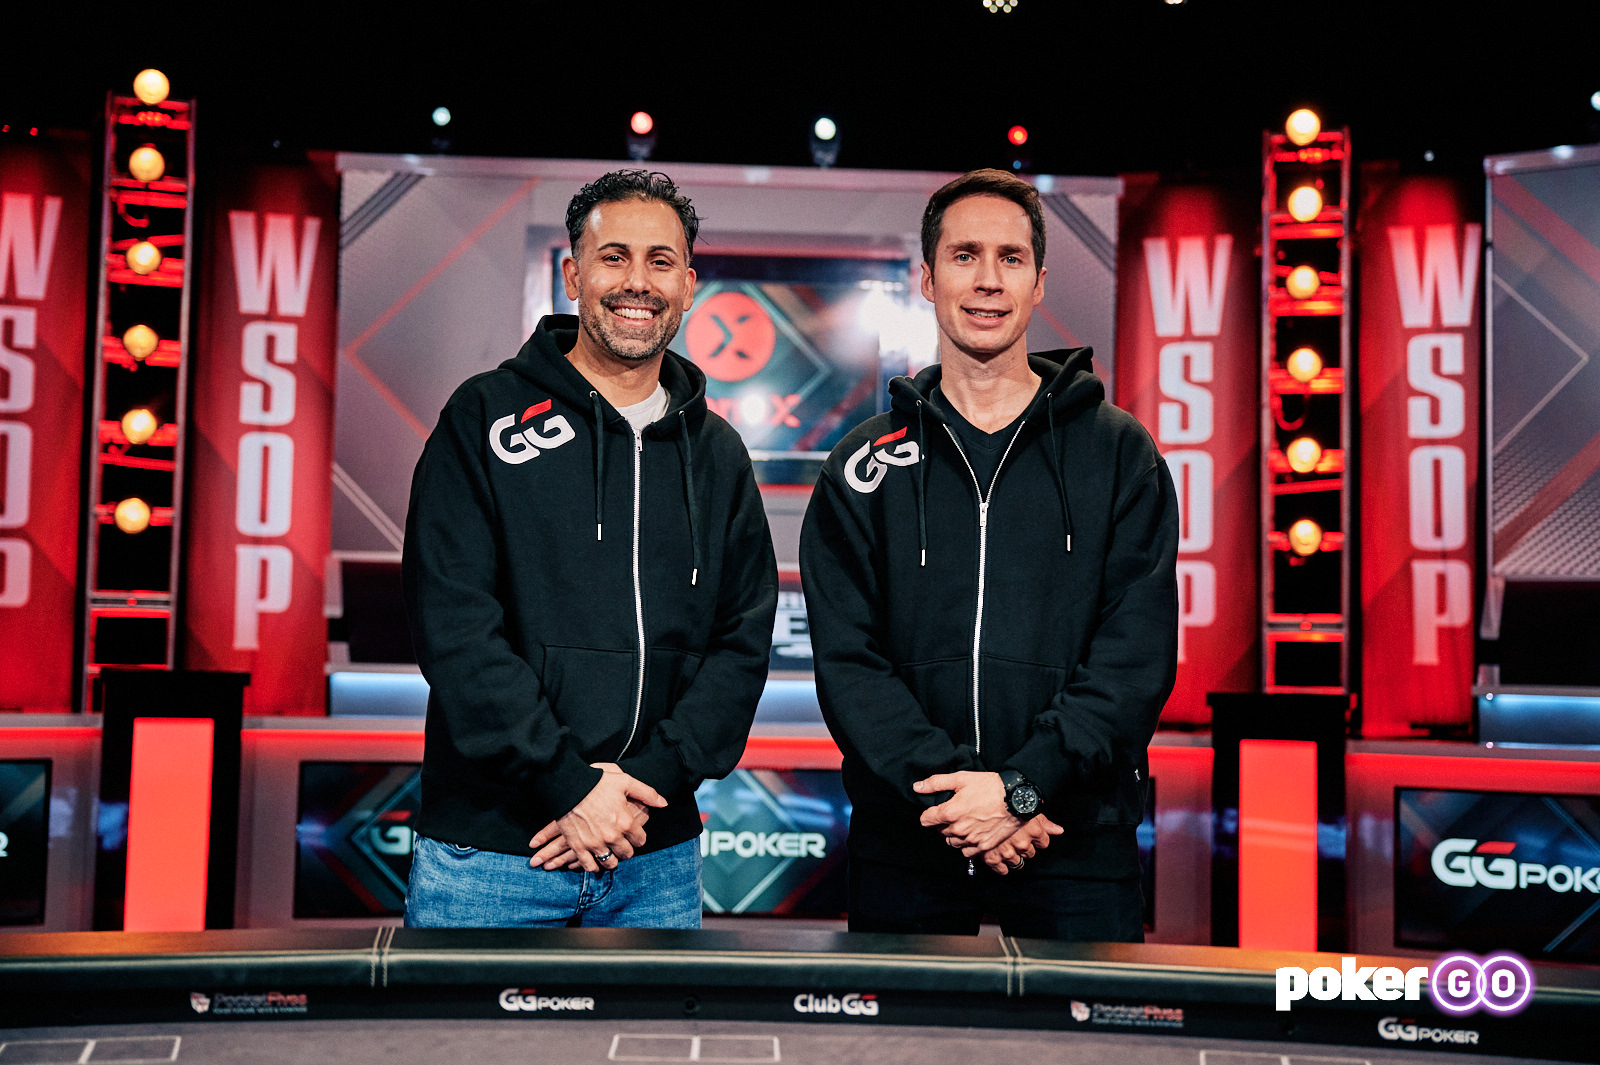 Short Stacks: Hellmuth Returns to the WSOP, GGPoker Adds Two New Ambassadors